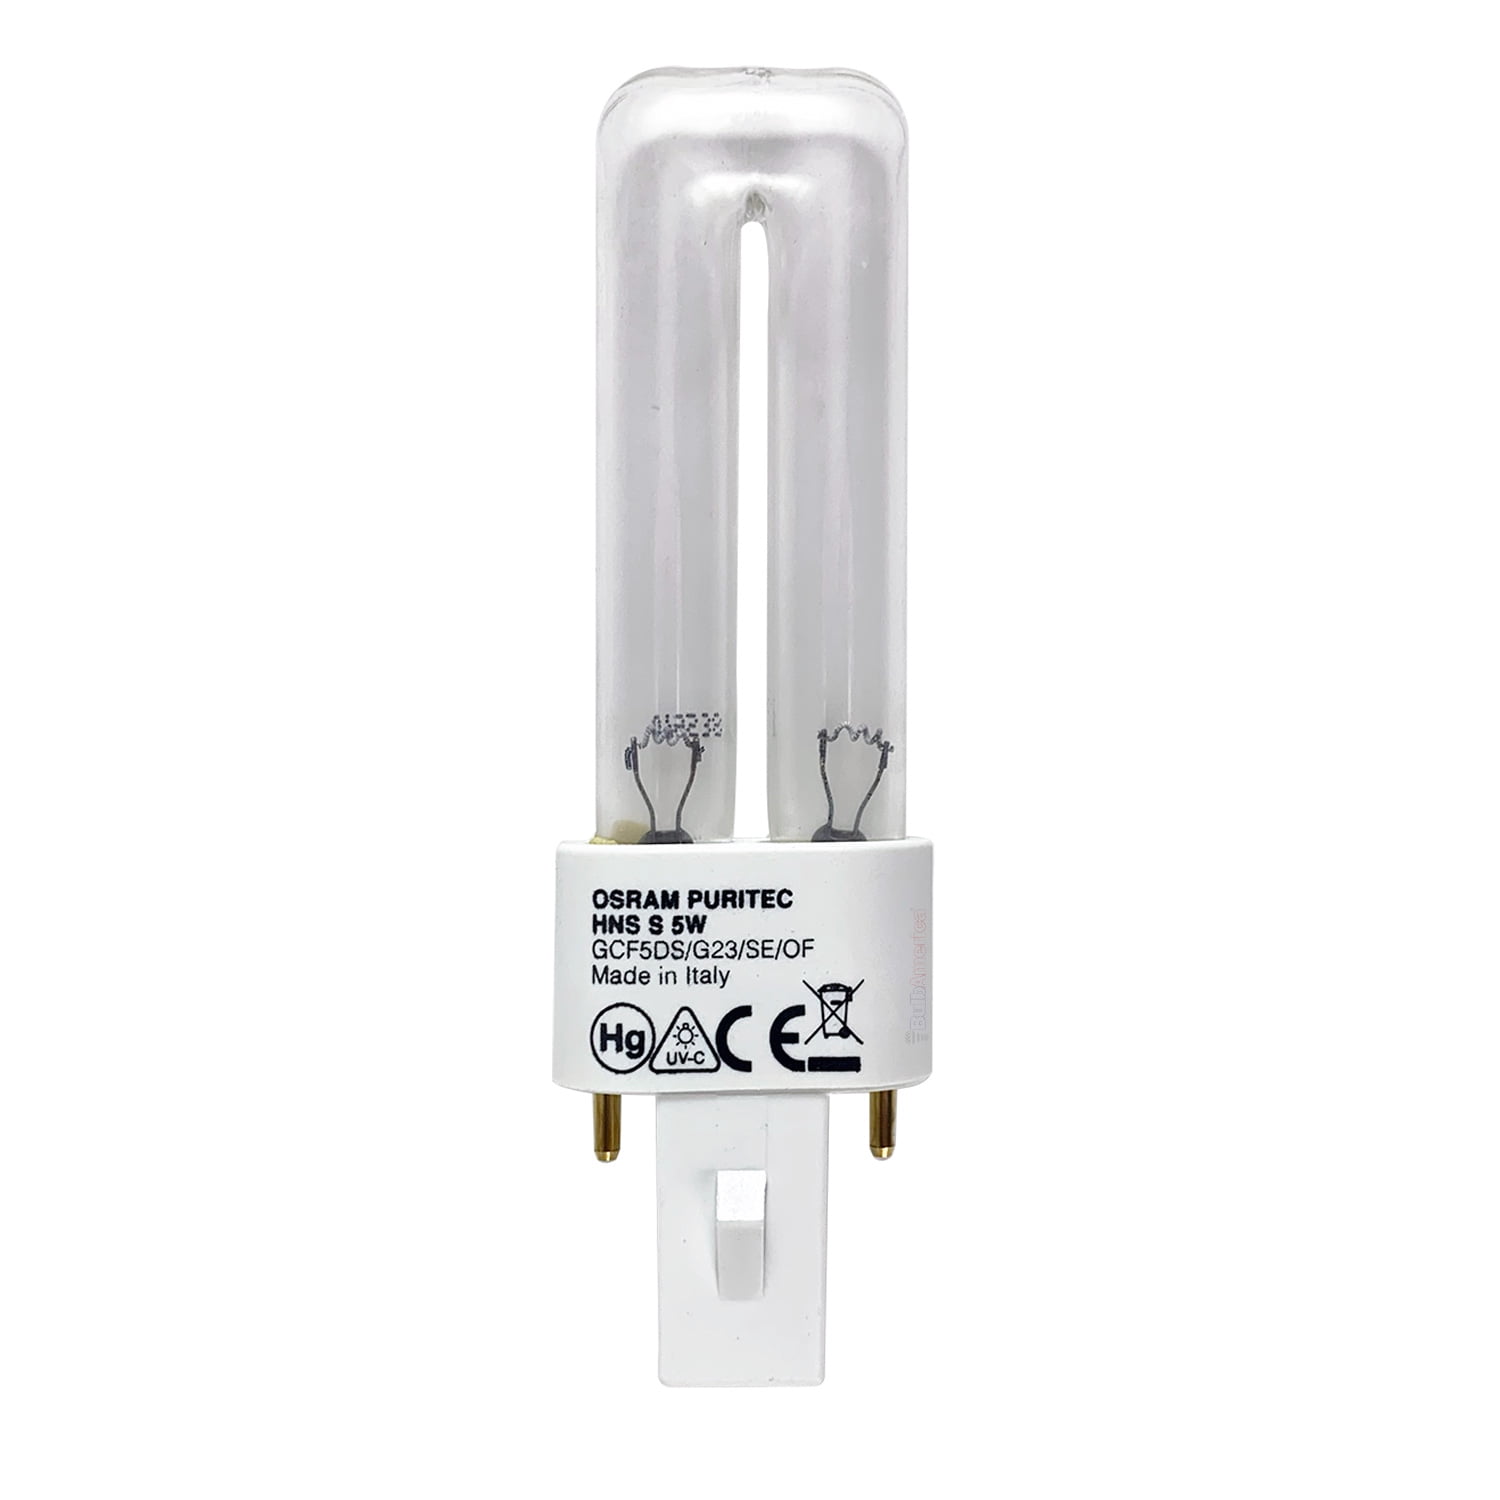 REPLACEMENT BULB FOR SPECTRONICS BLE-1T155 15W 